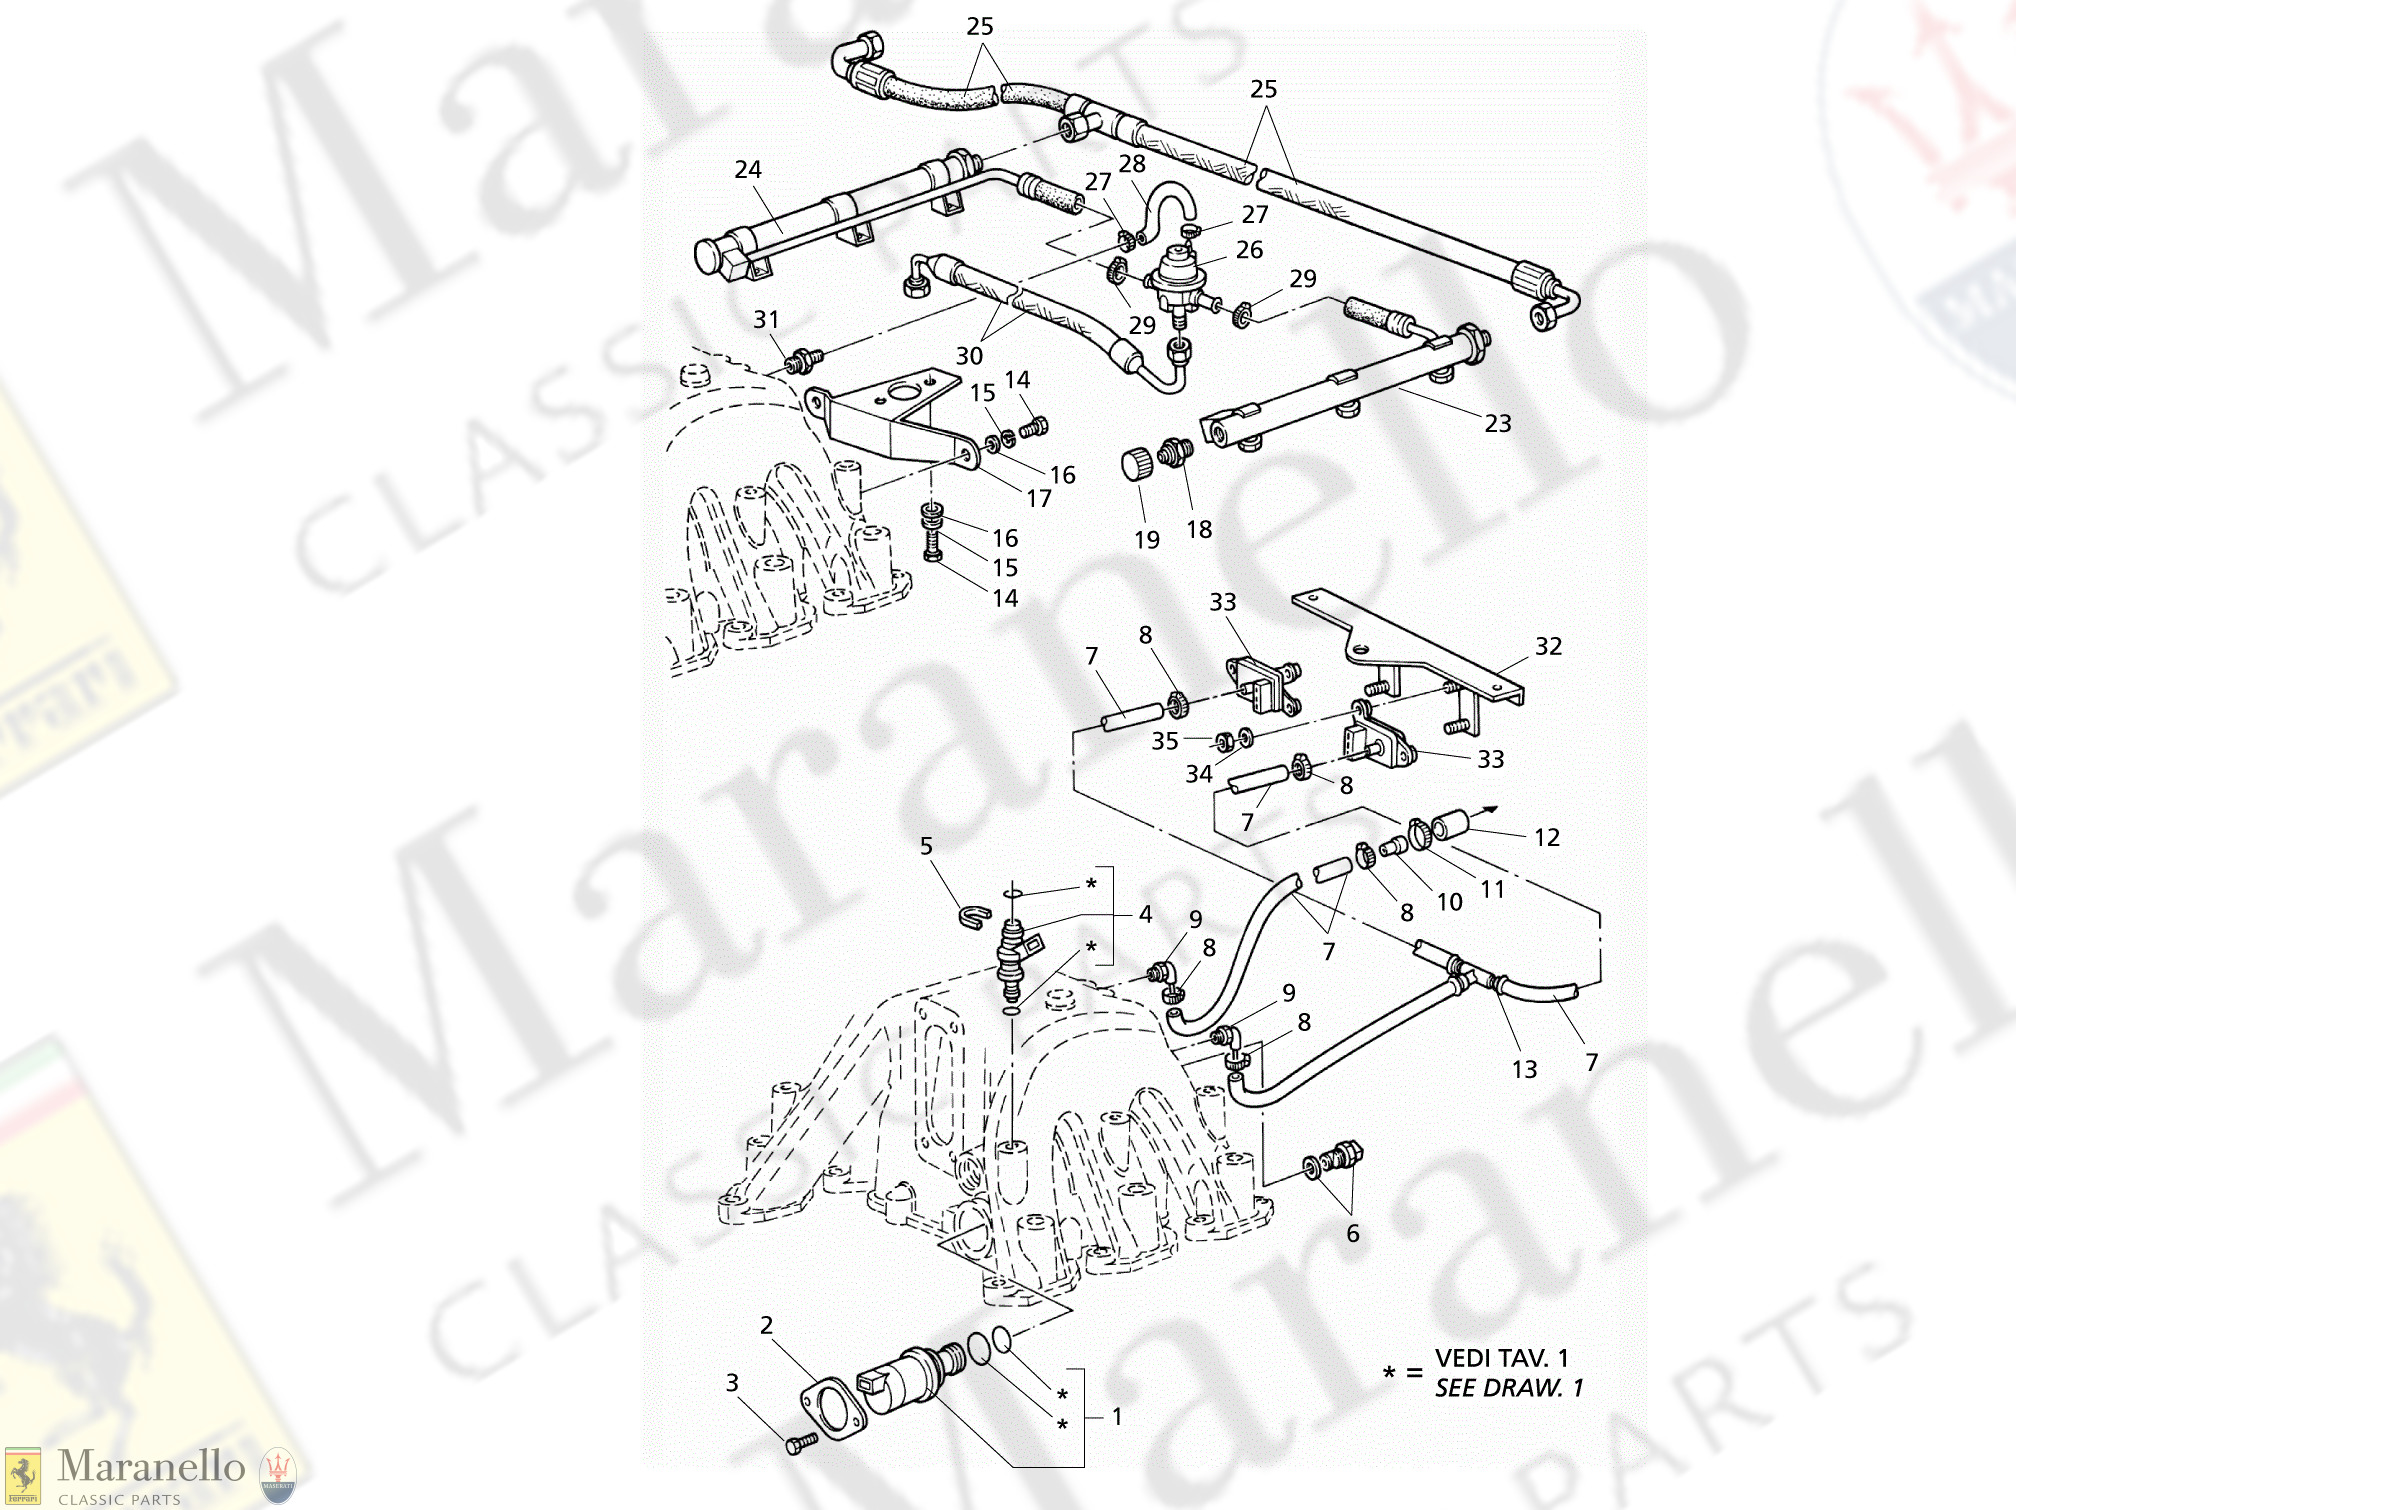 C 13.1 - C 131 - Intake Manifold And Injection System